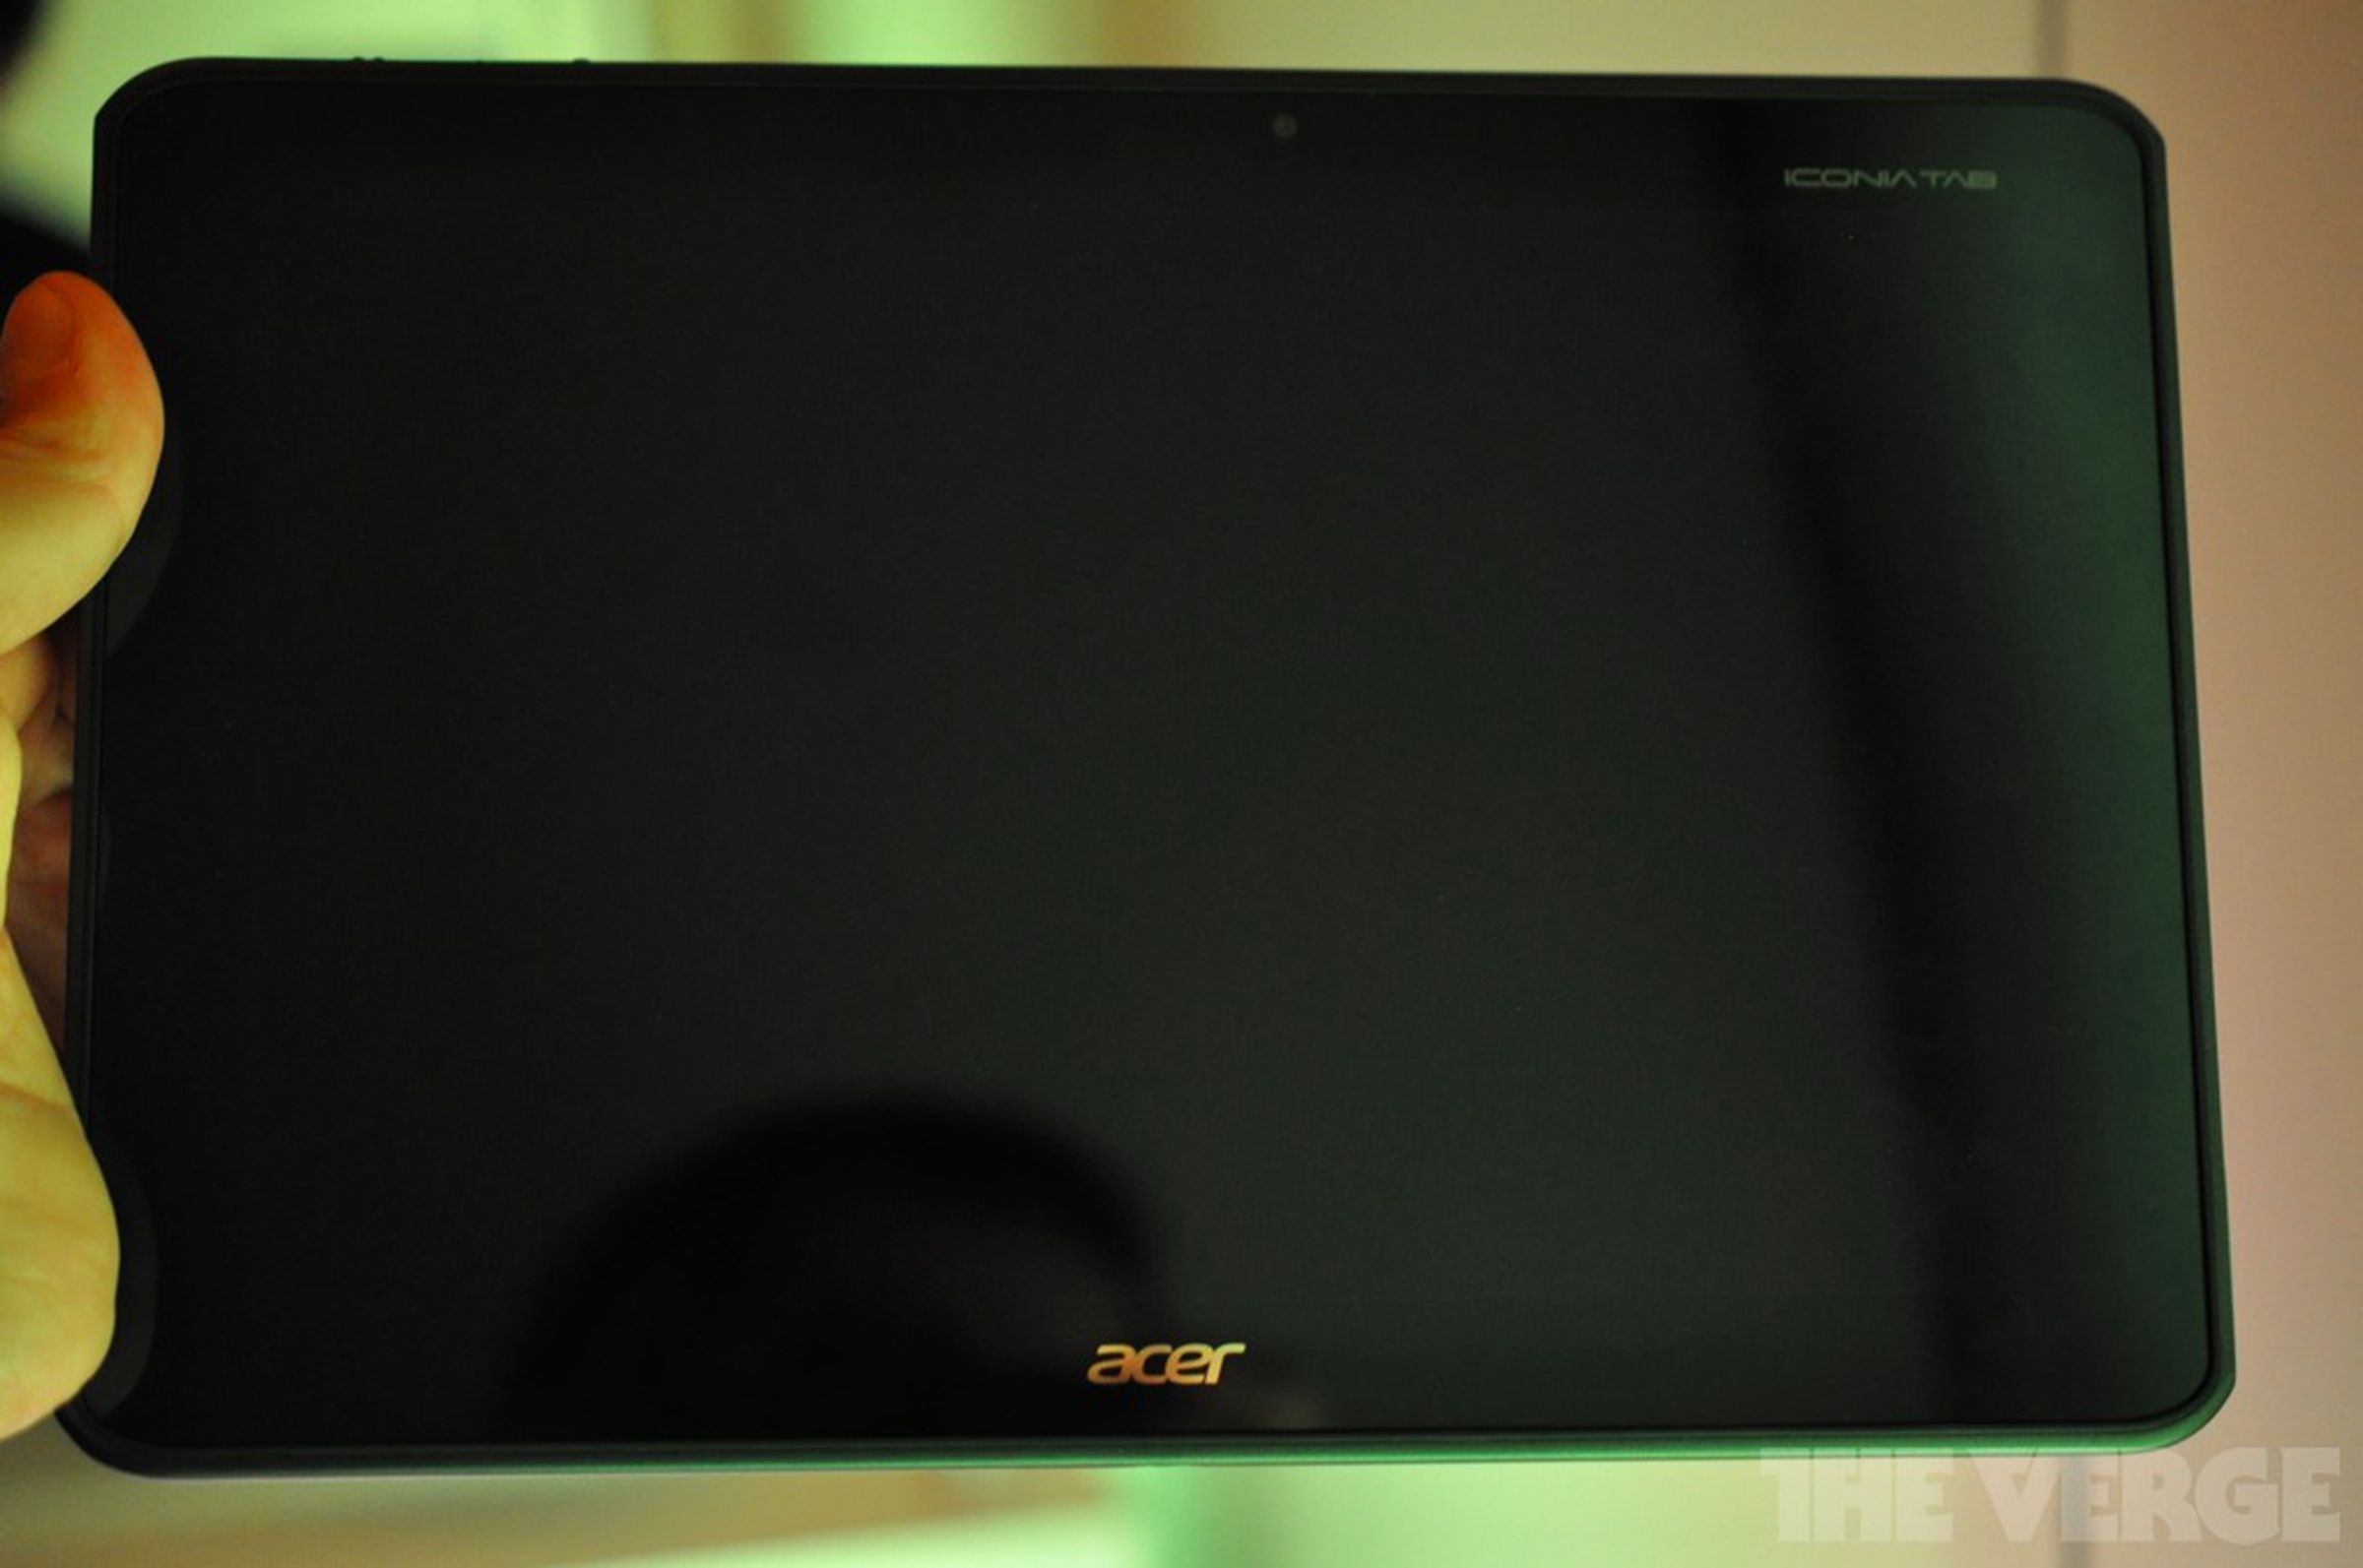 Acer Iconia Tab A700 hands-on photos